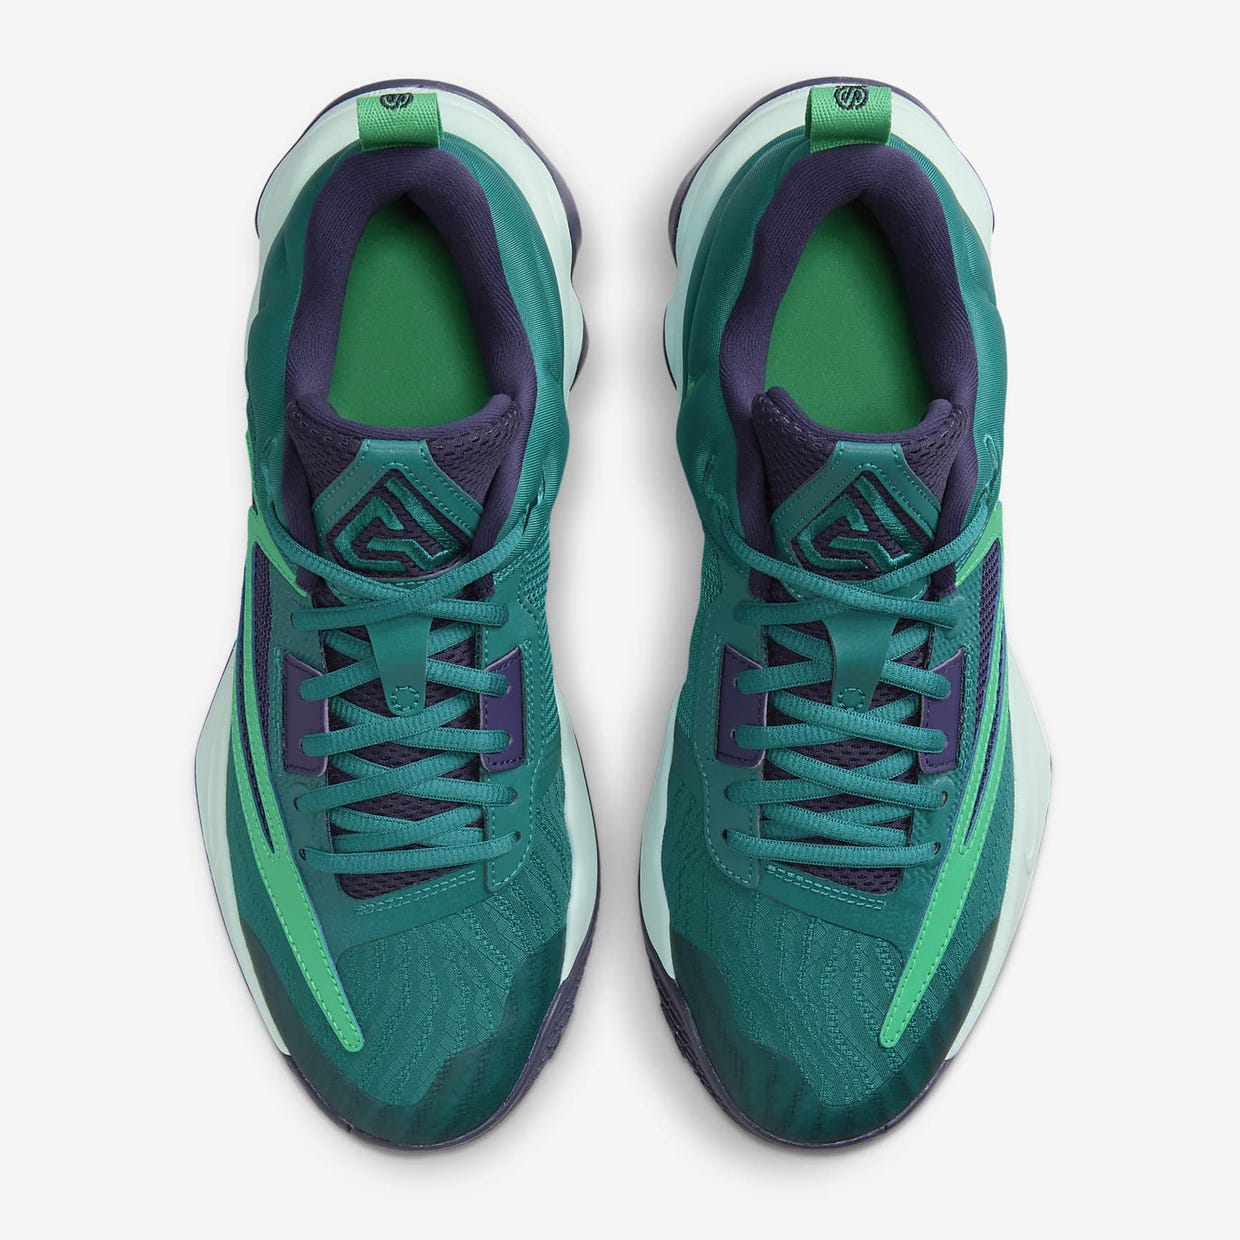 A pair of green and purple athletic sneakers viewed from above.